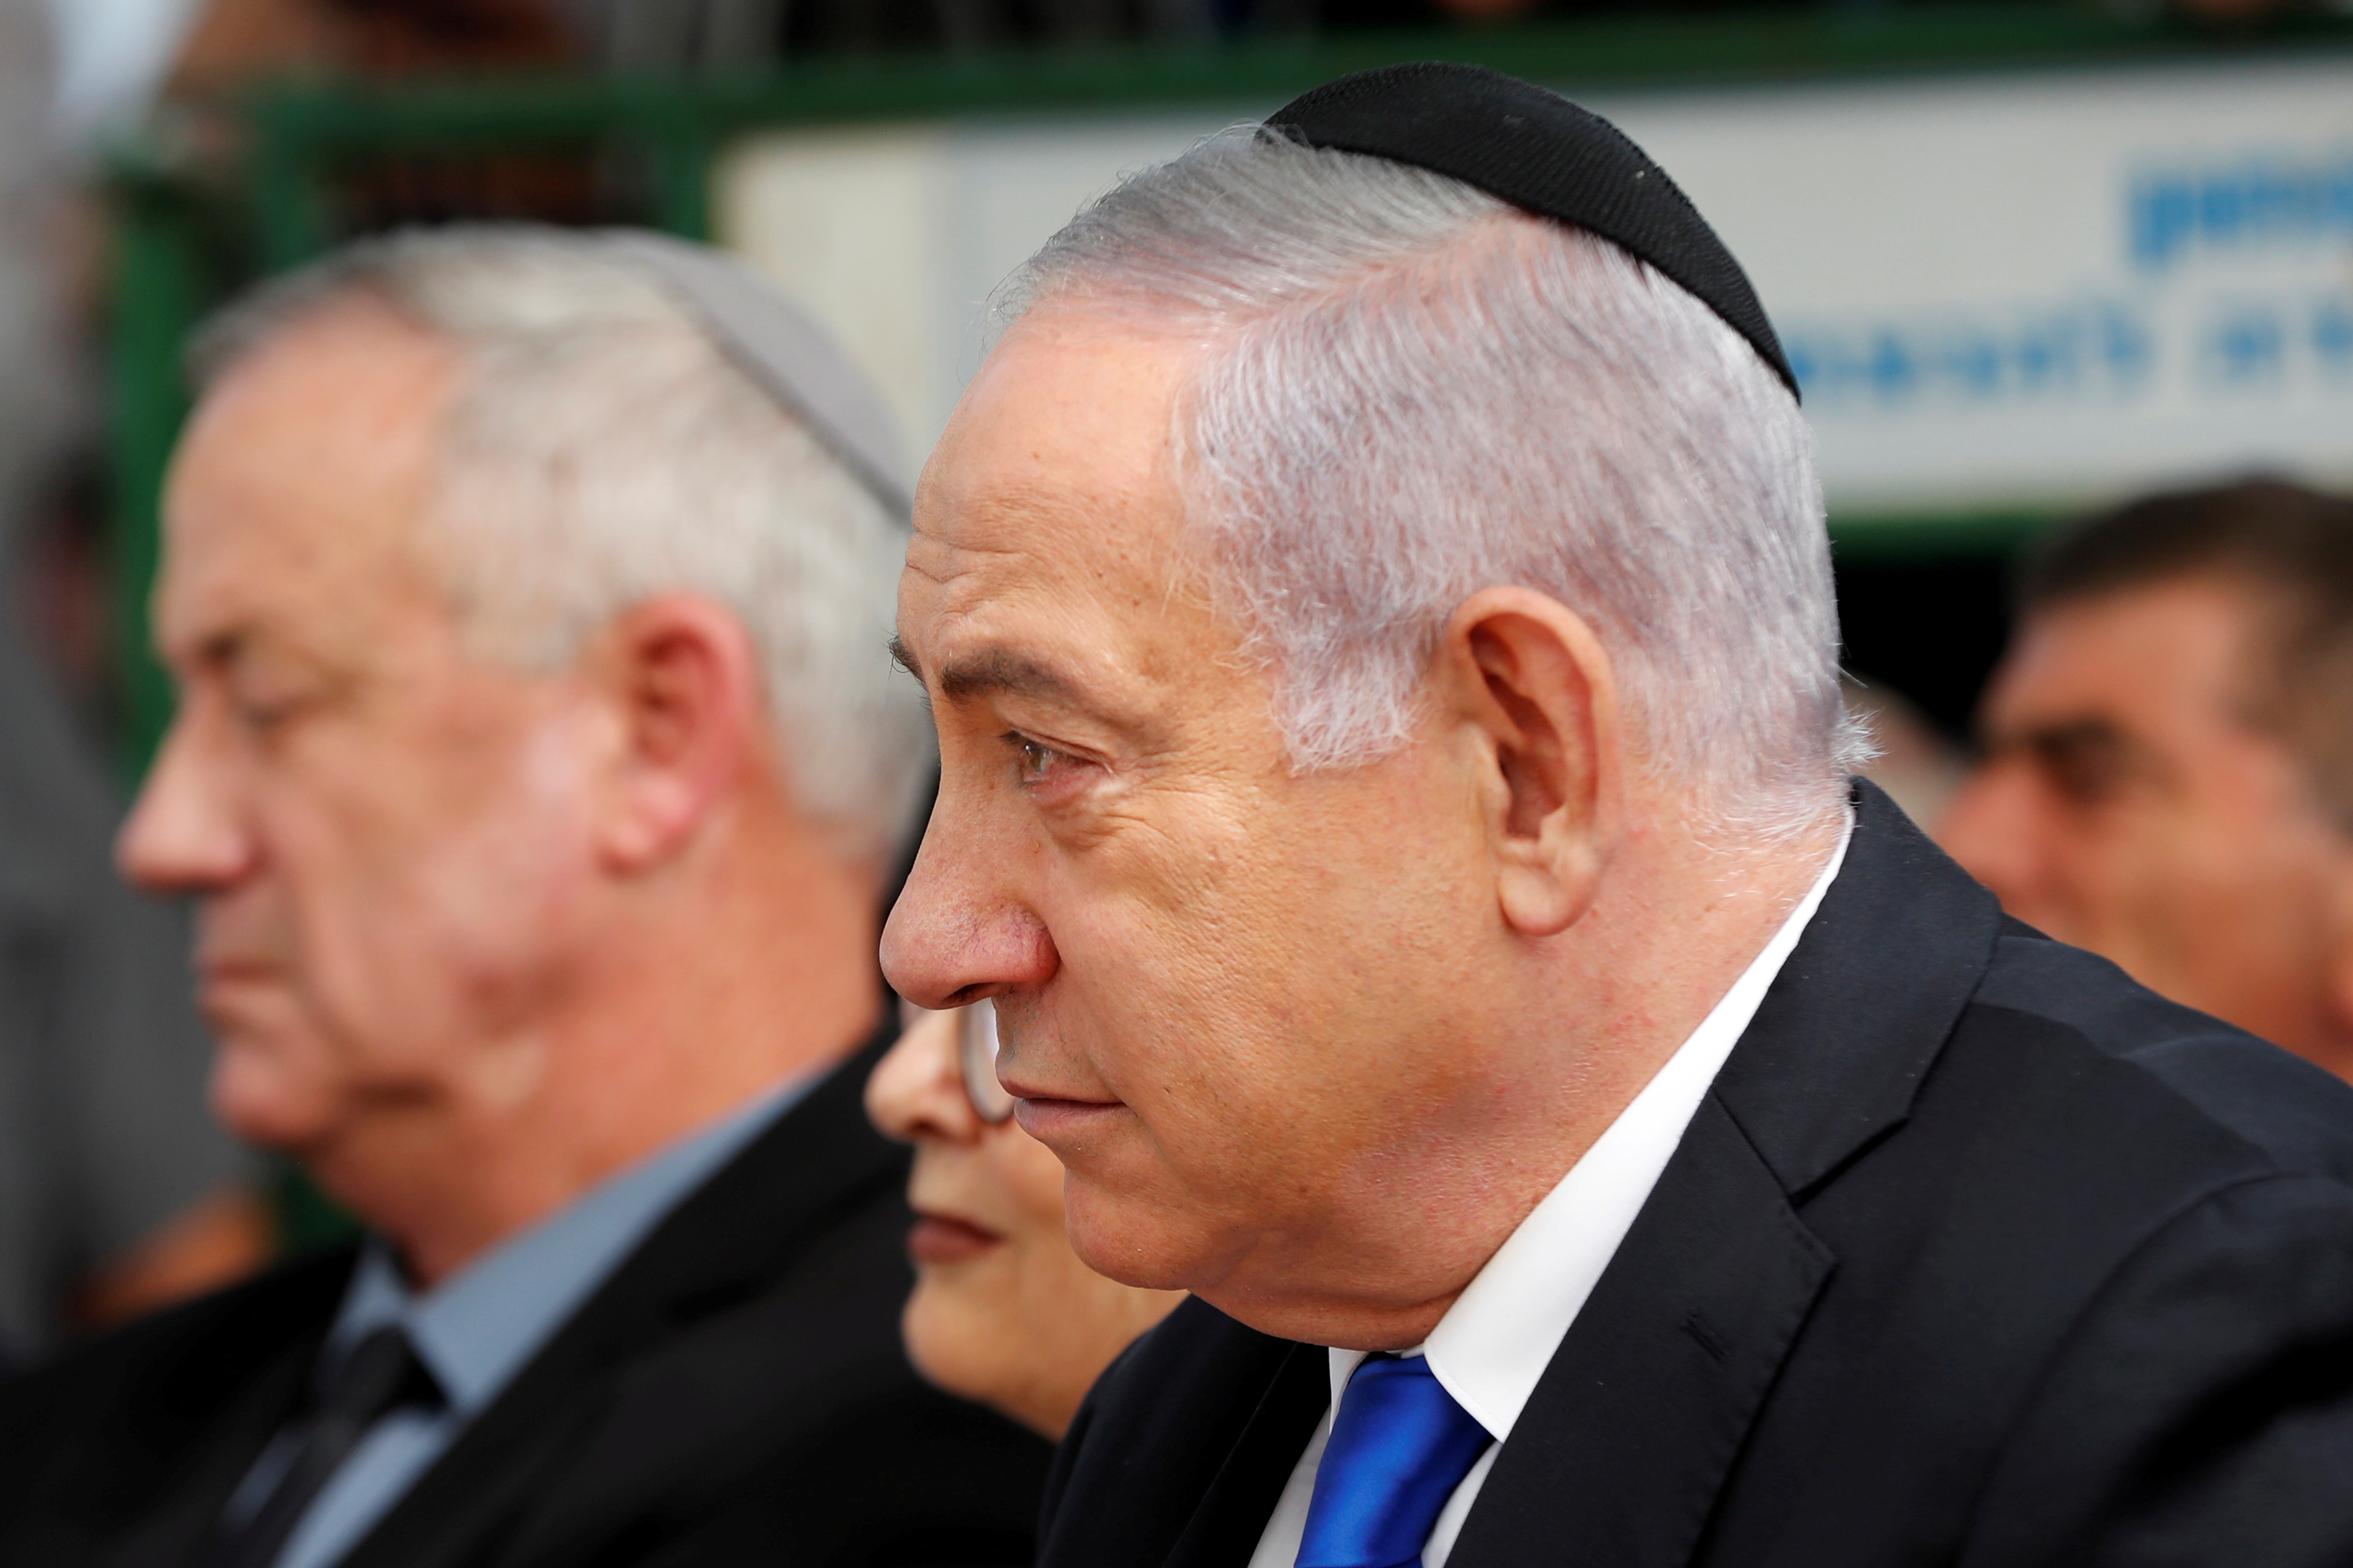 Israeli Prime Minister Benjamin Netanyahu sits next to Benny Gantz, leader of the Blue and White party on 22 September (Reuters)